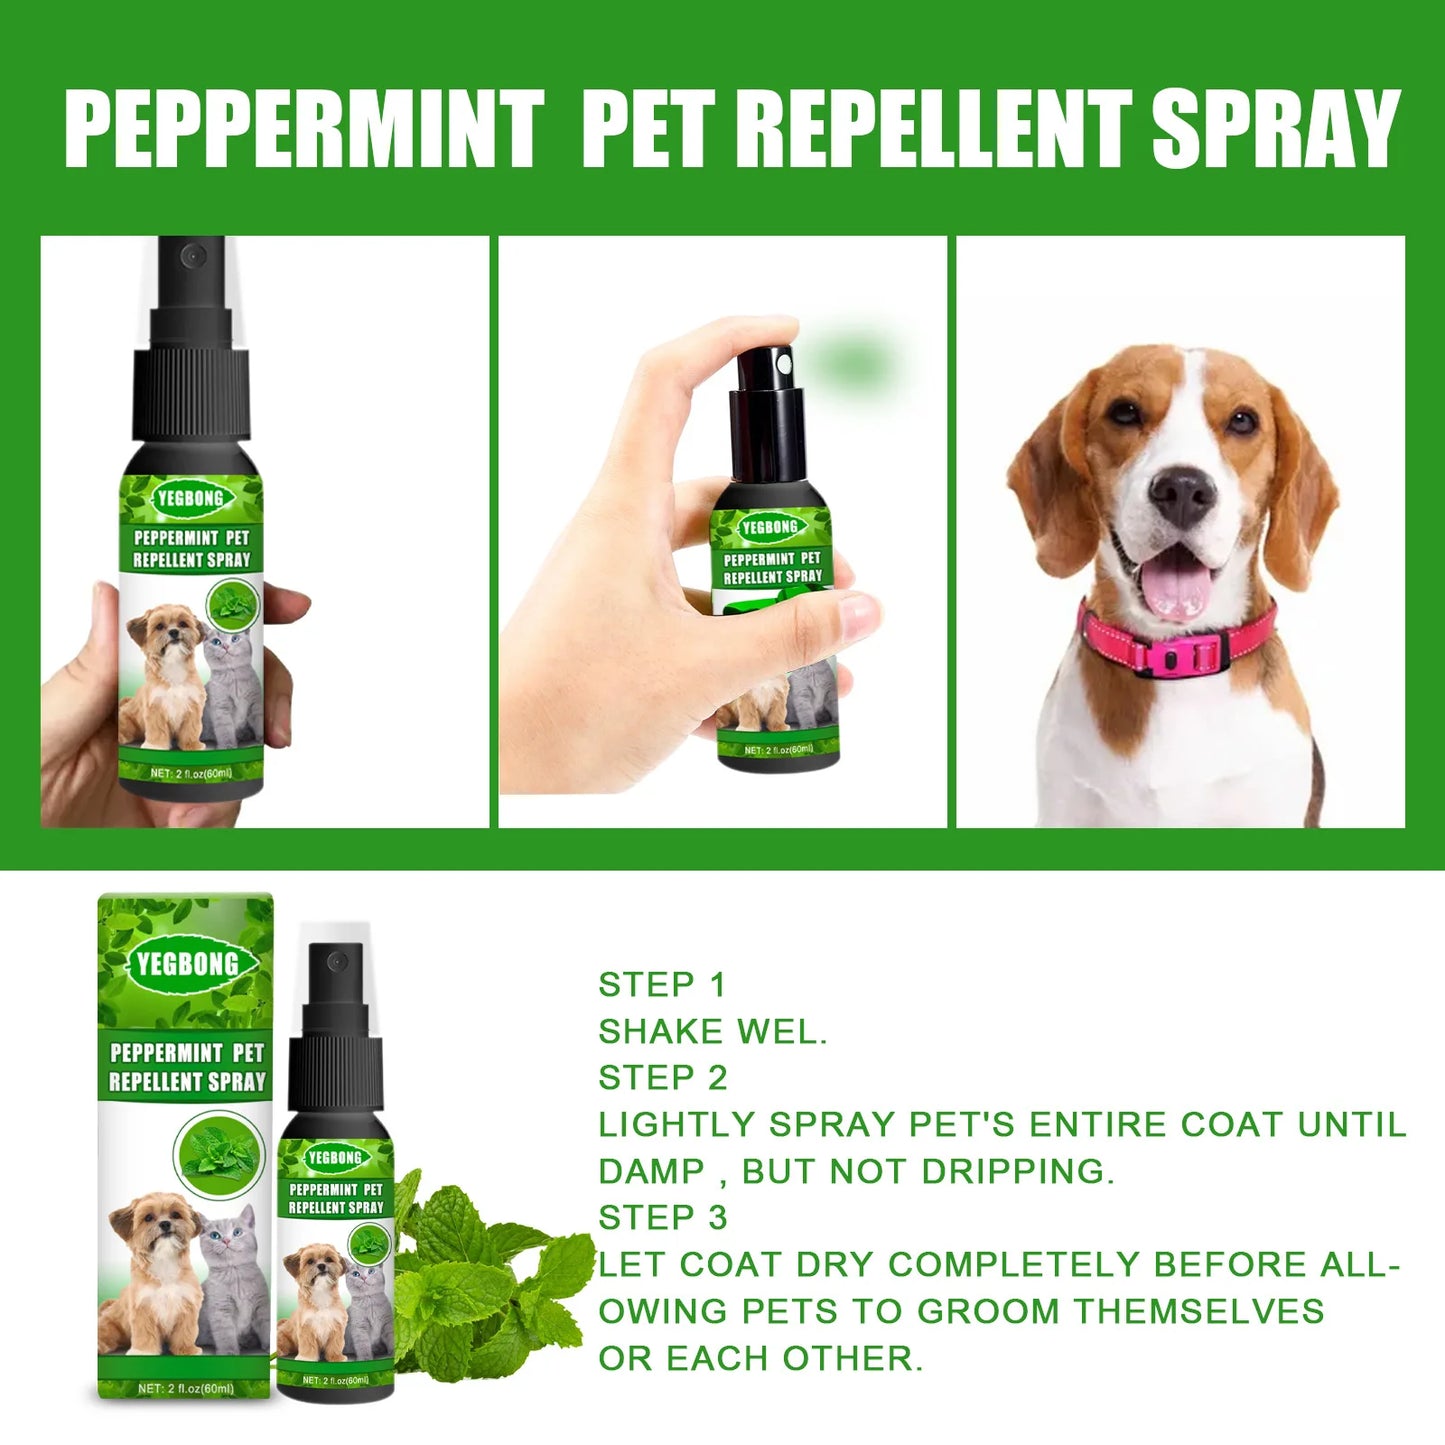 Long-Lasting Relief from Fleas, Ticks, Lice, Mites, and Ringworm in Dogs and Cats